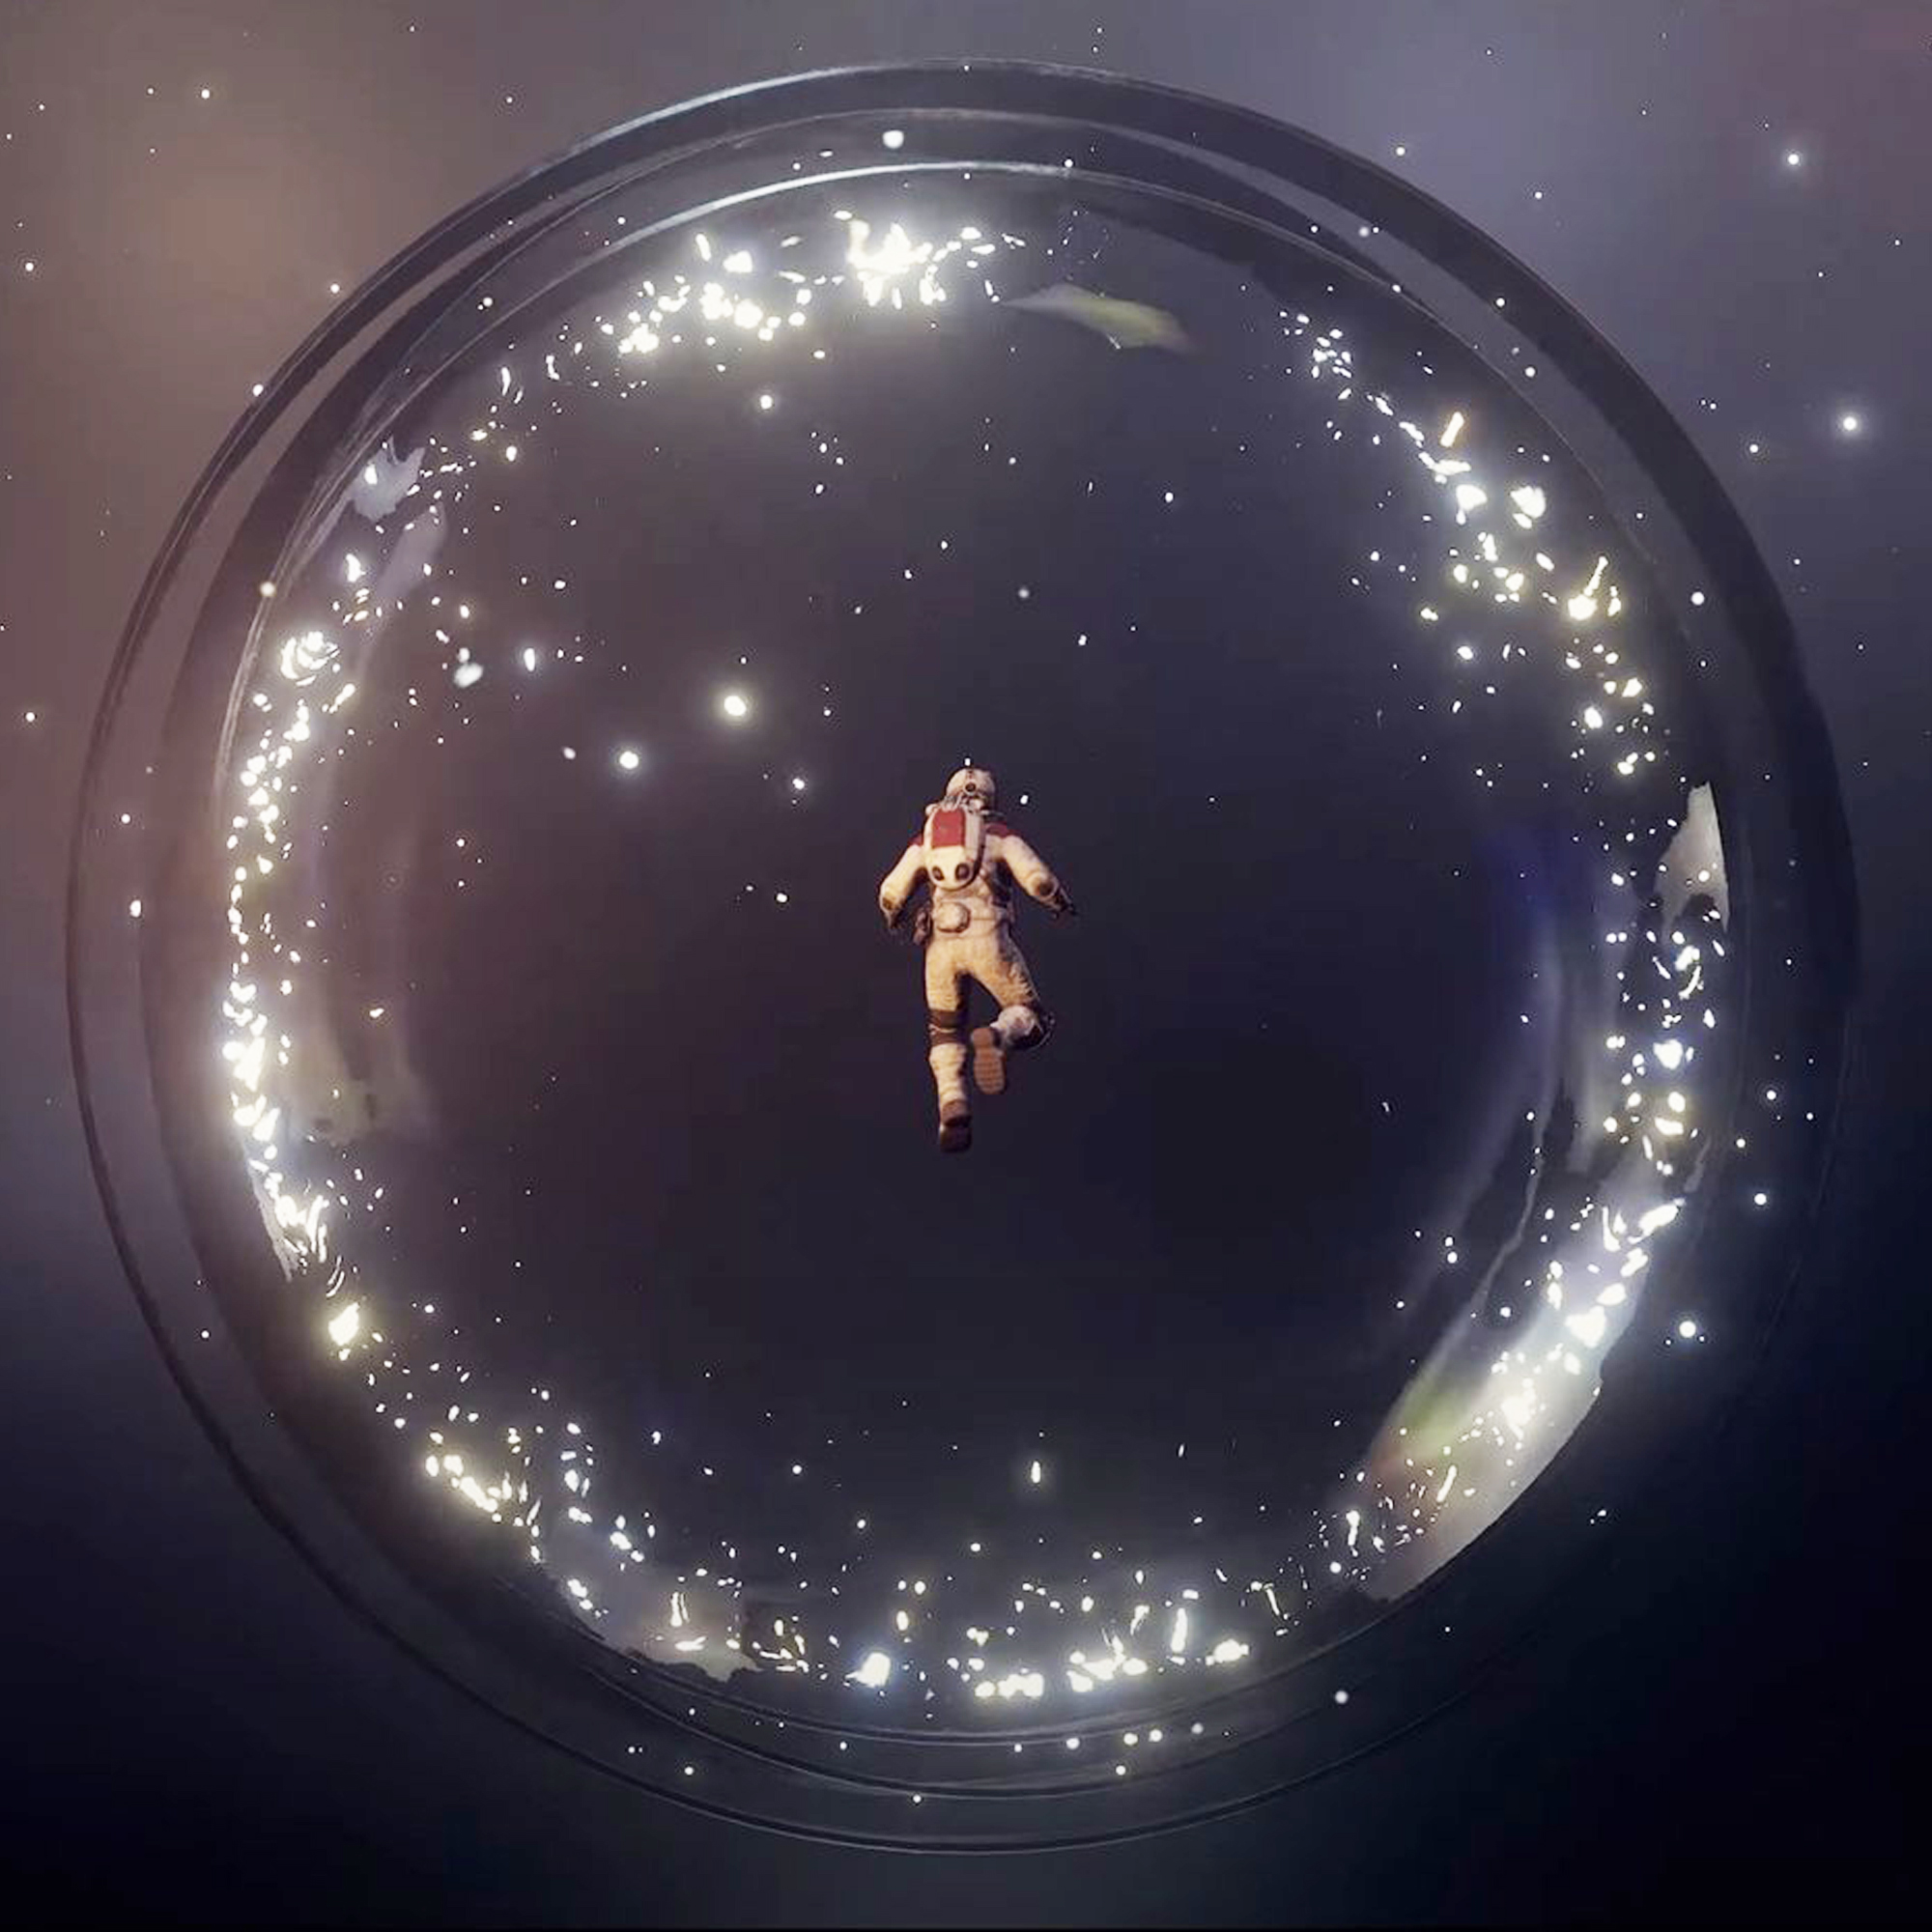 Starfield: release date, trailers, gameplay, and more